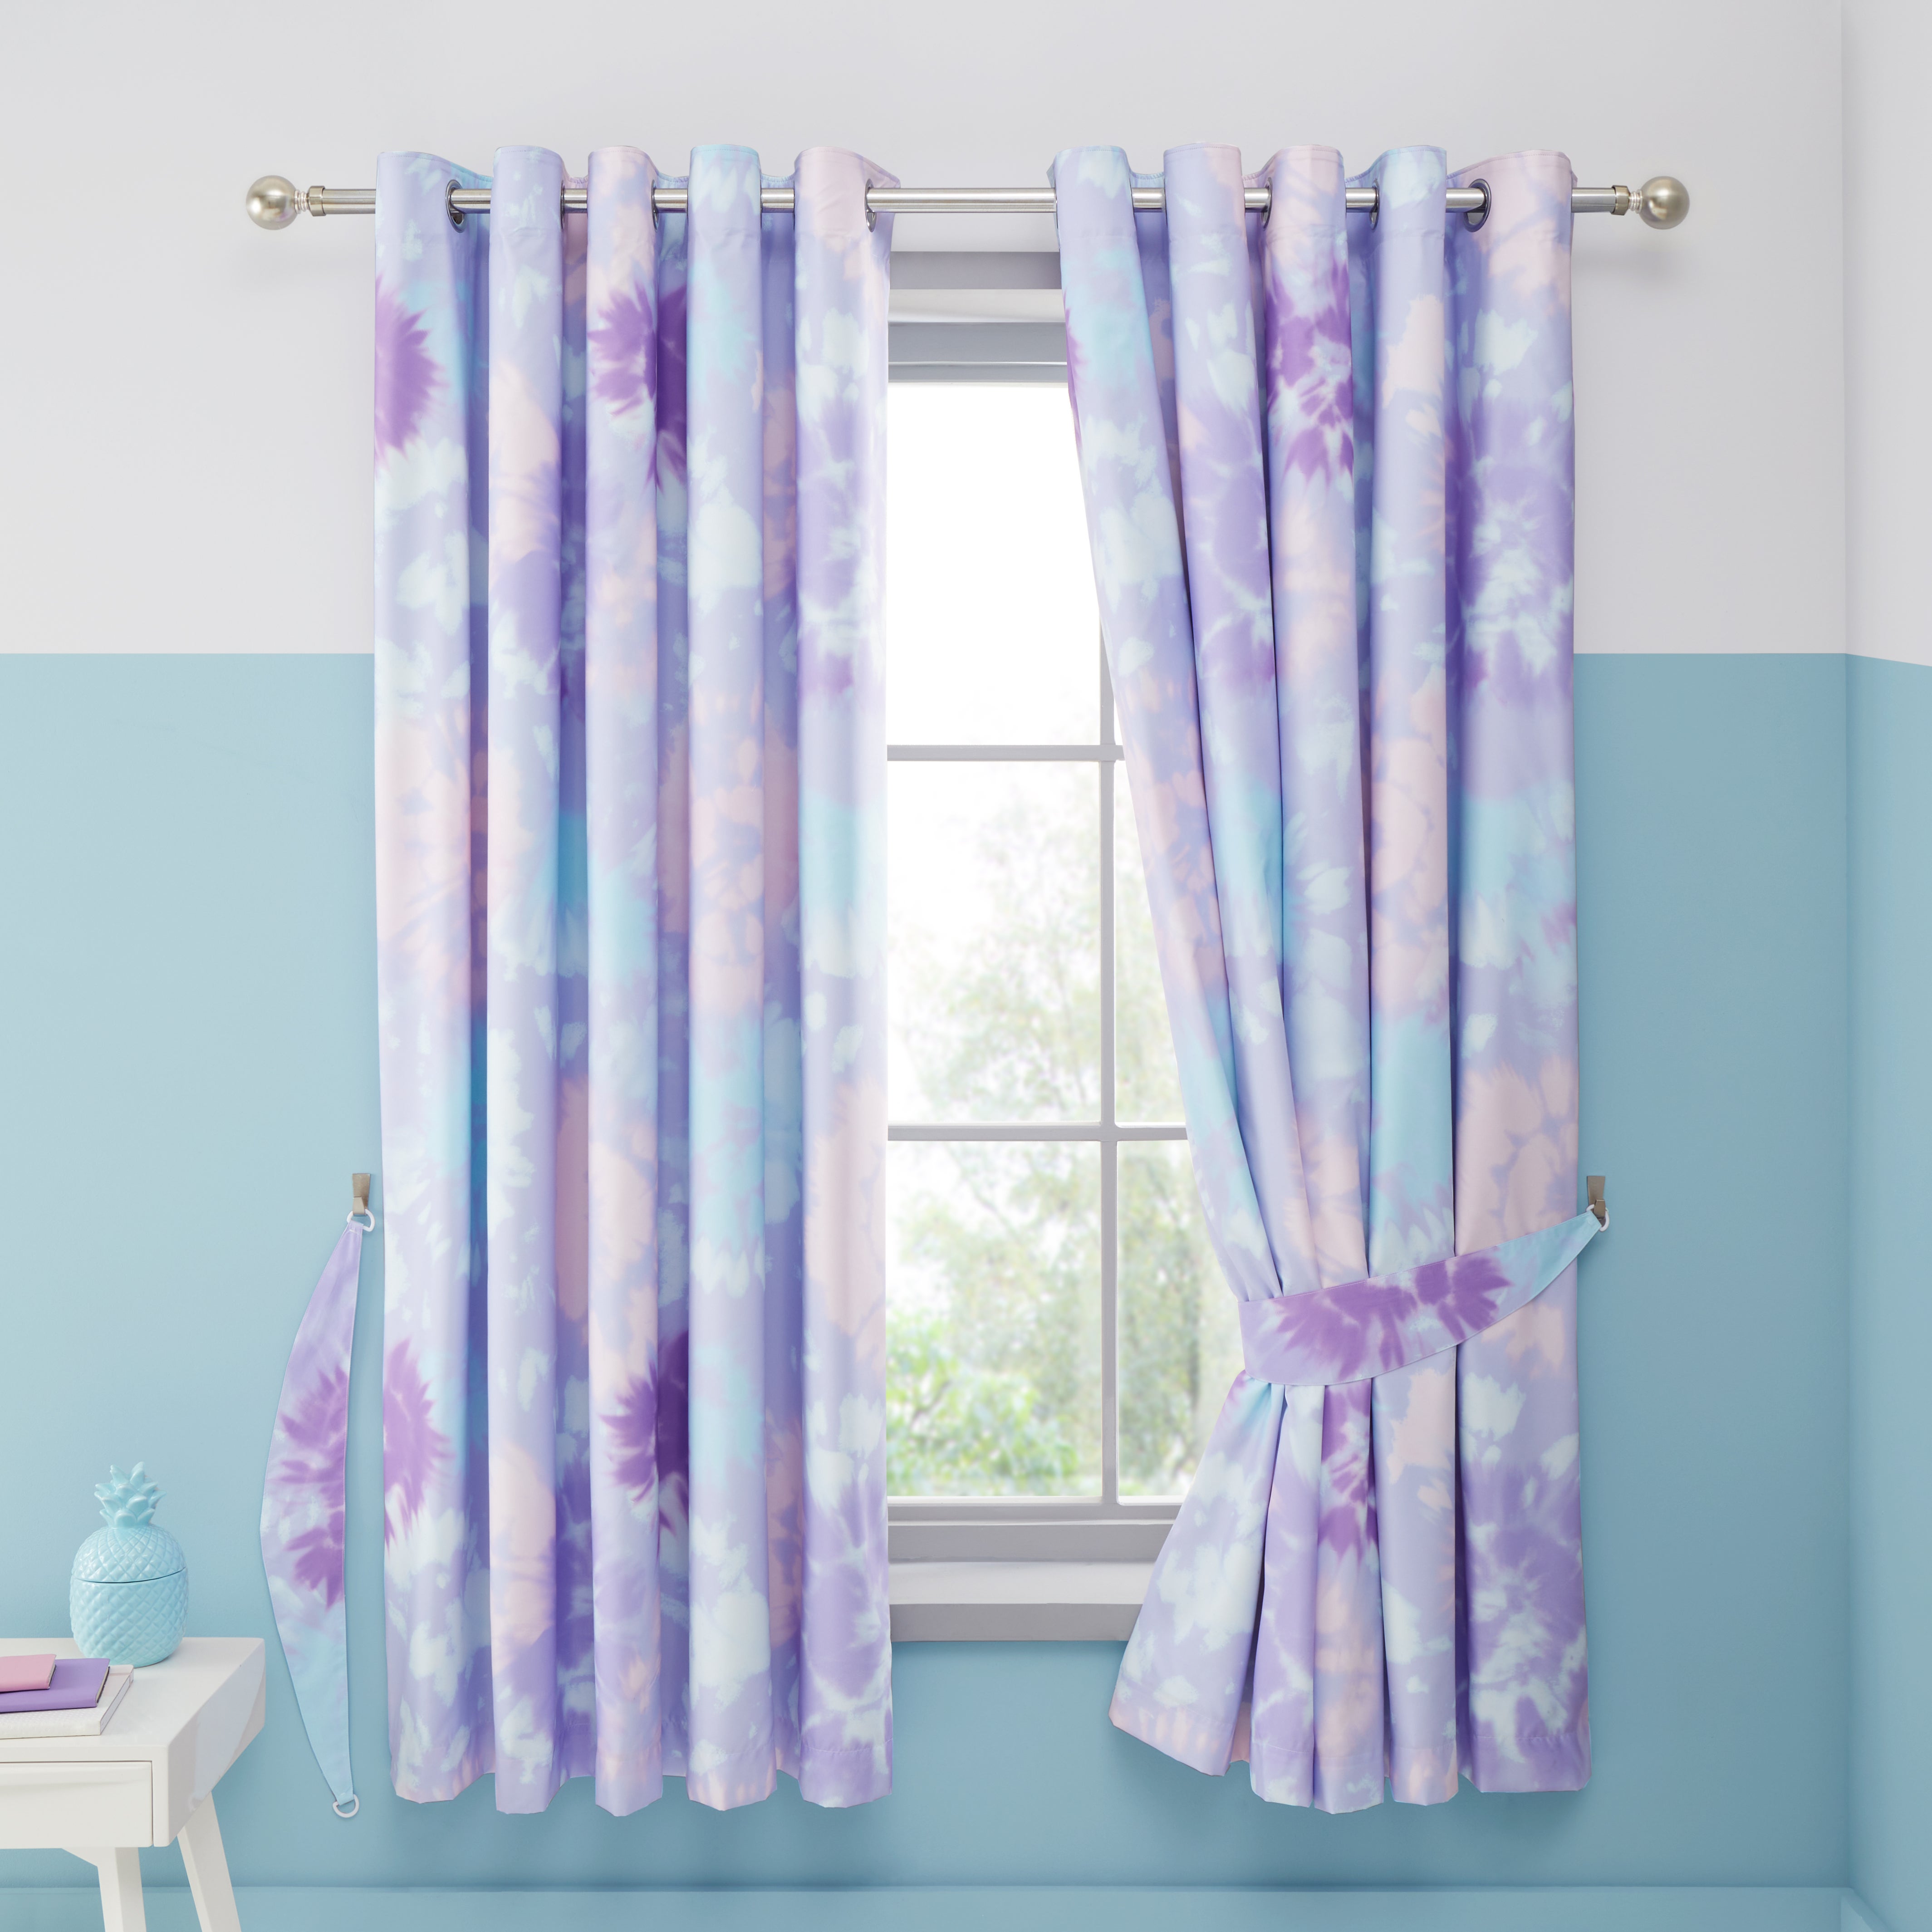 Ombre Eyelet Curtains